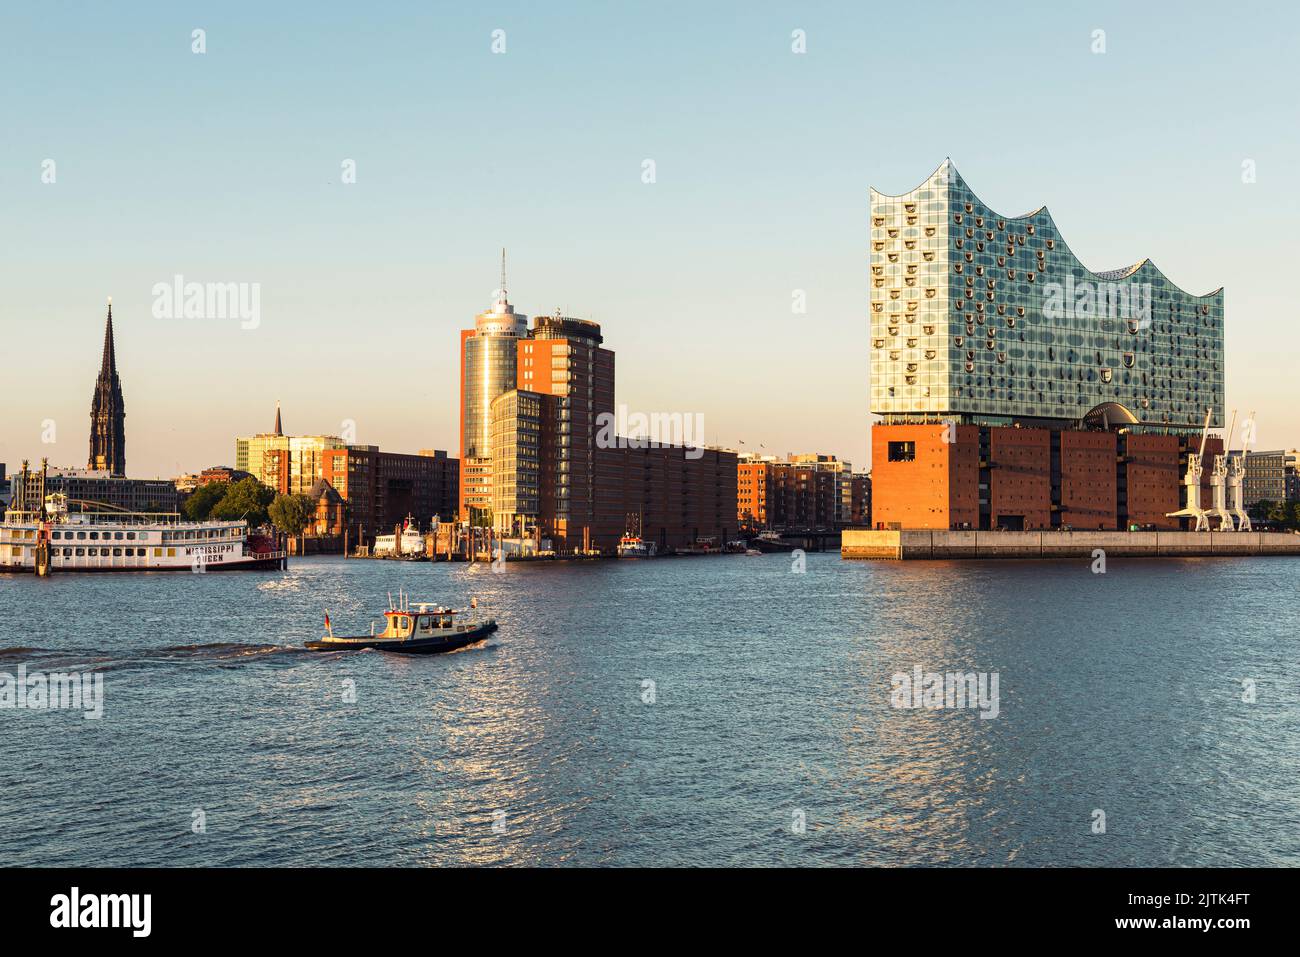 St.Nikolai, the Übersee Bridge, the warehouse district, the Elbphilharmonie Concert Hall and HafenCity in the harbour of Hamburg shortly before sunset Stock Photo